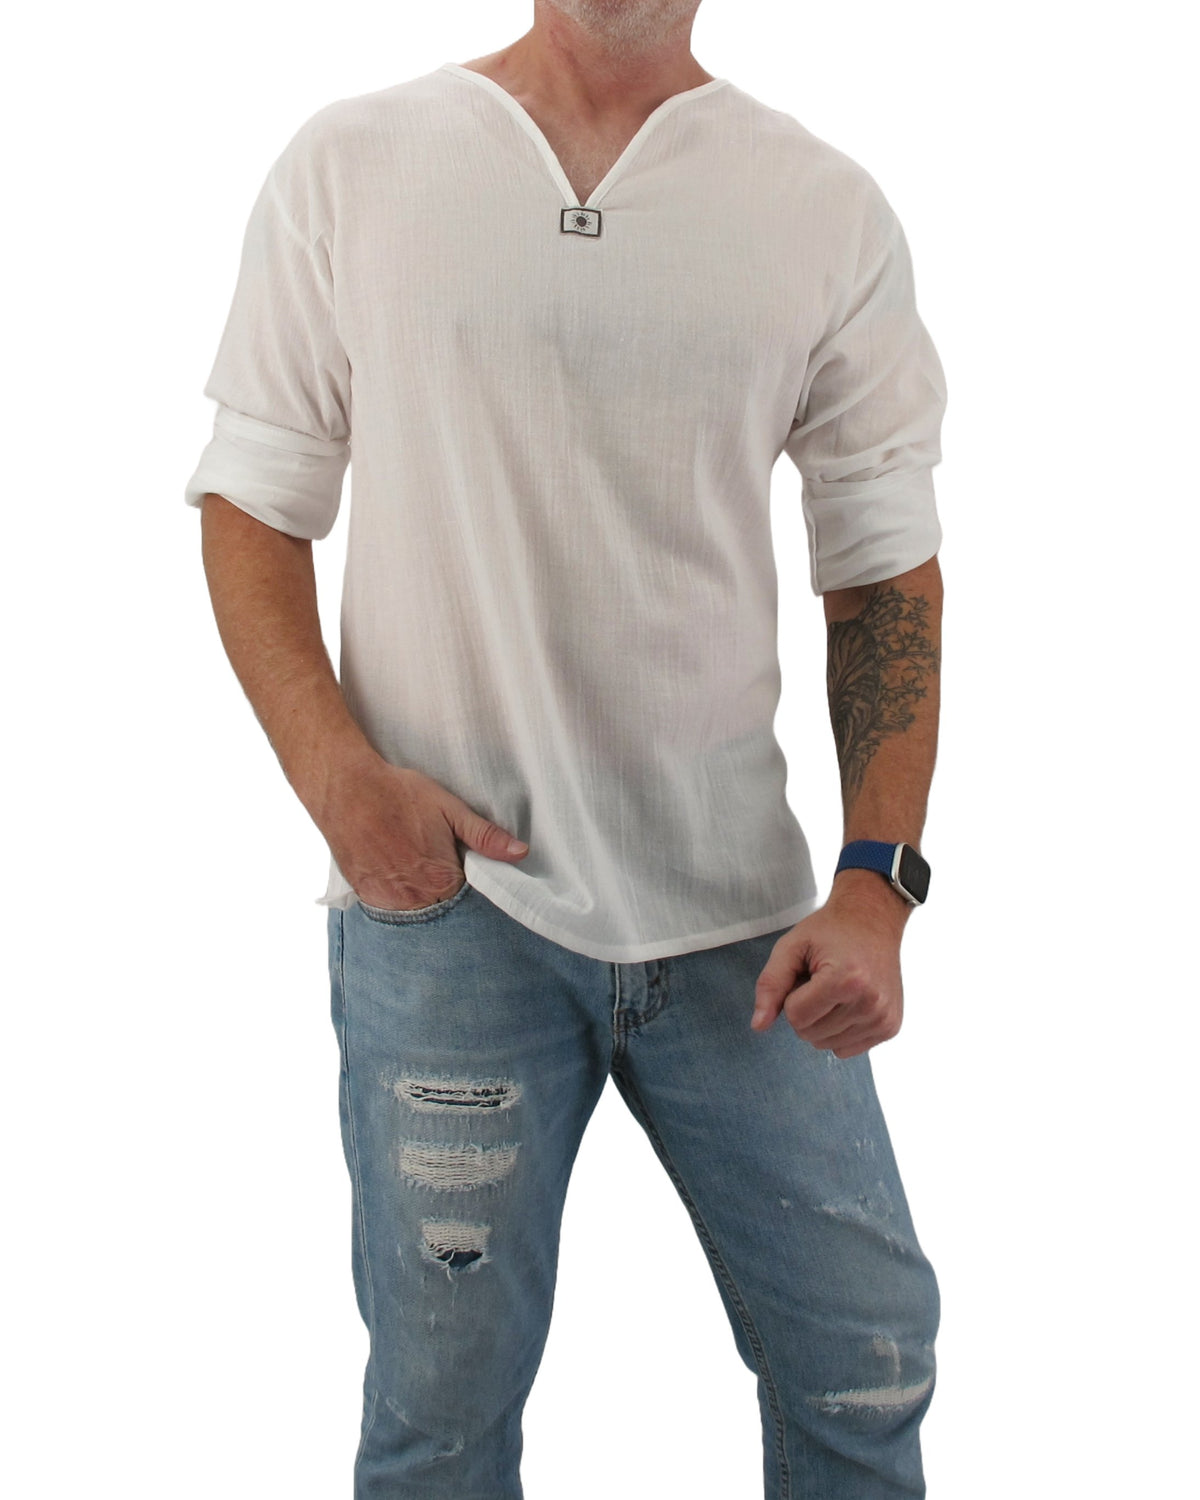 Shop white oversized t shirt for perfect streetwear look